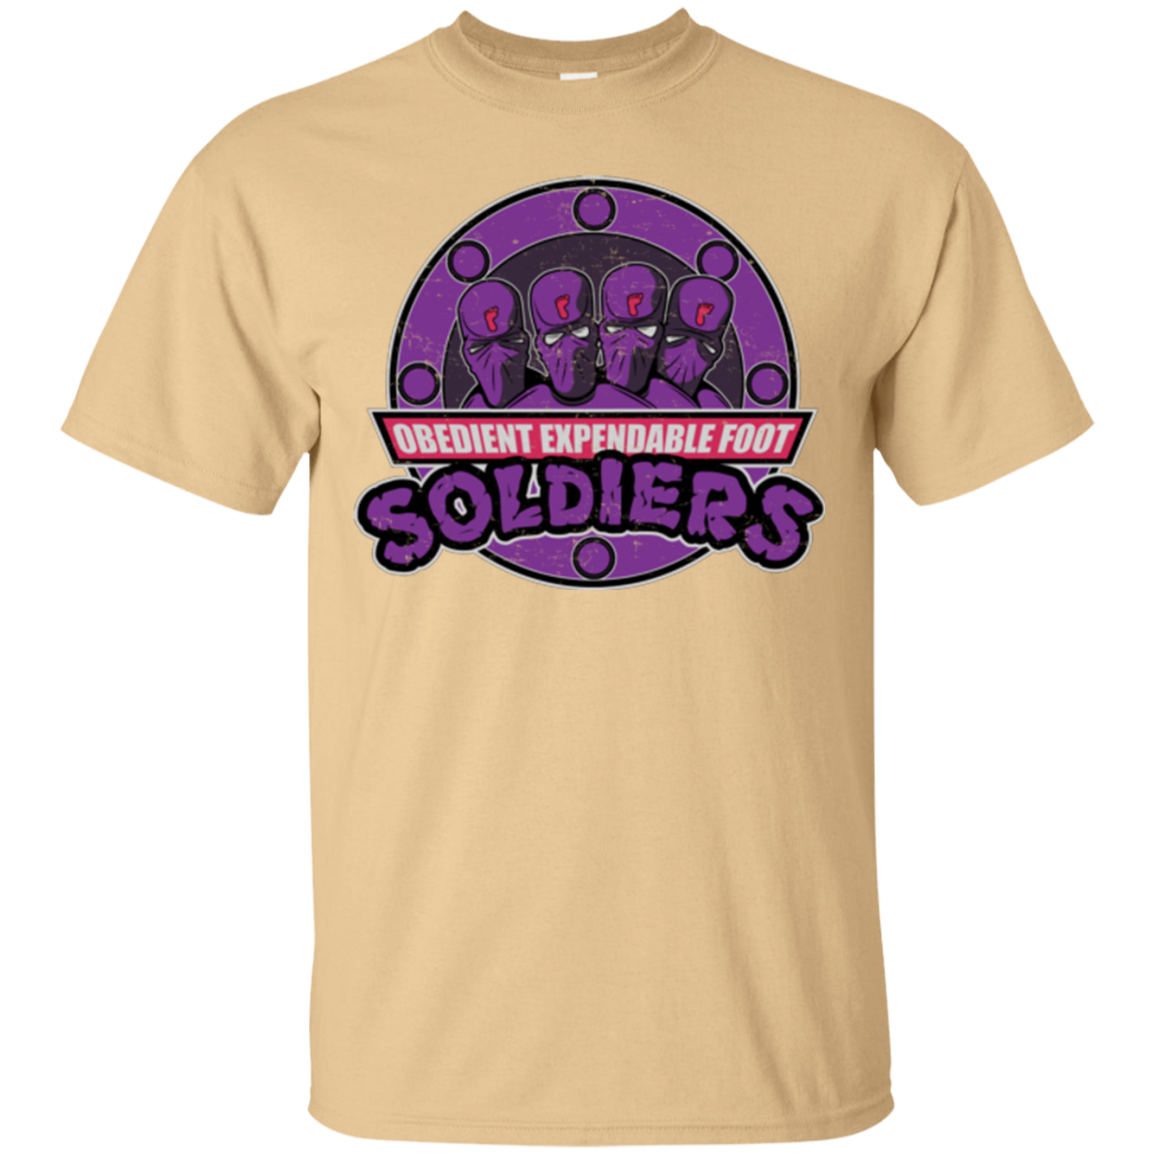 OBEDIENT EXPENDABLE FOOT SOLDIERS T-Shirt